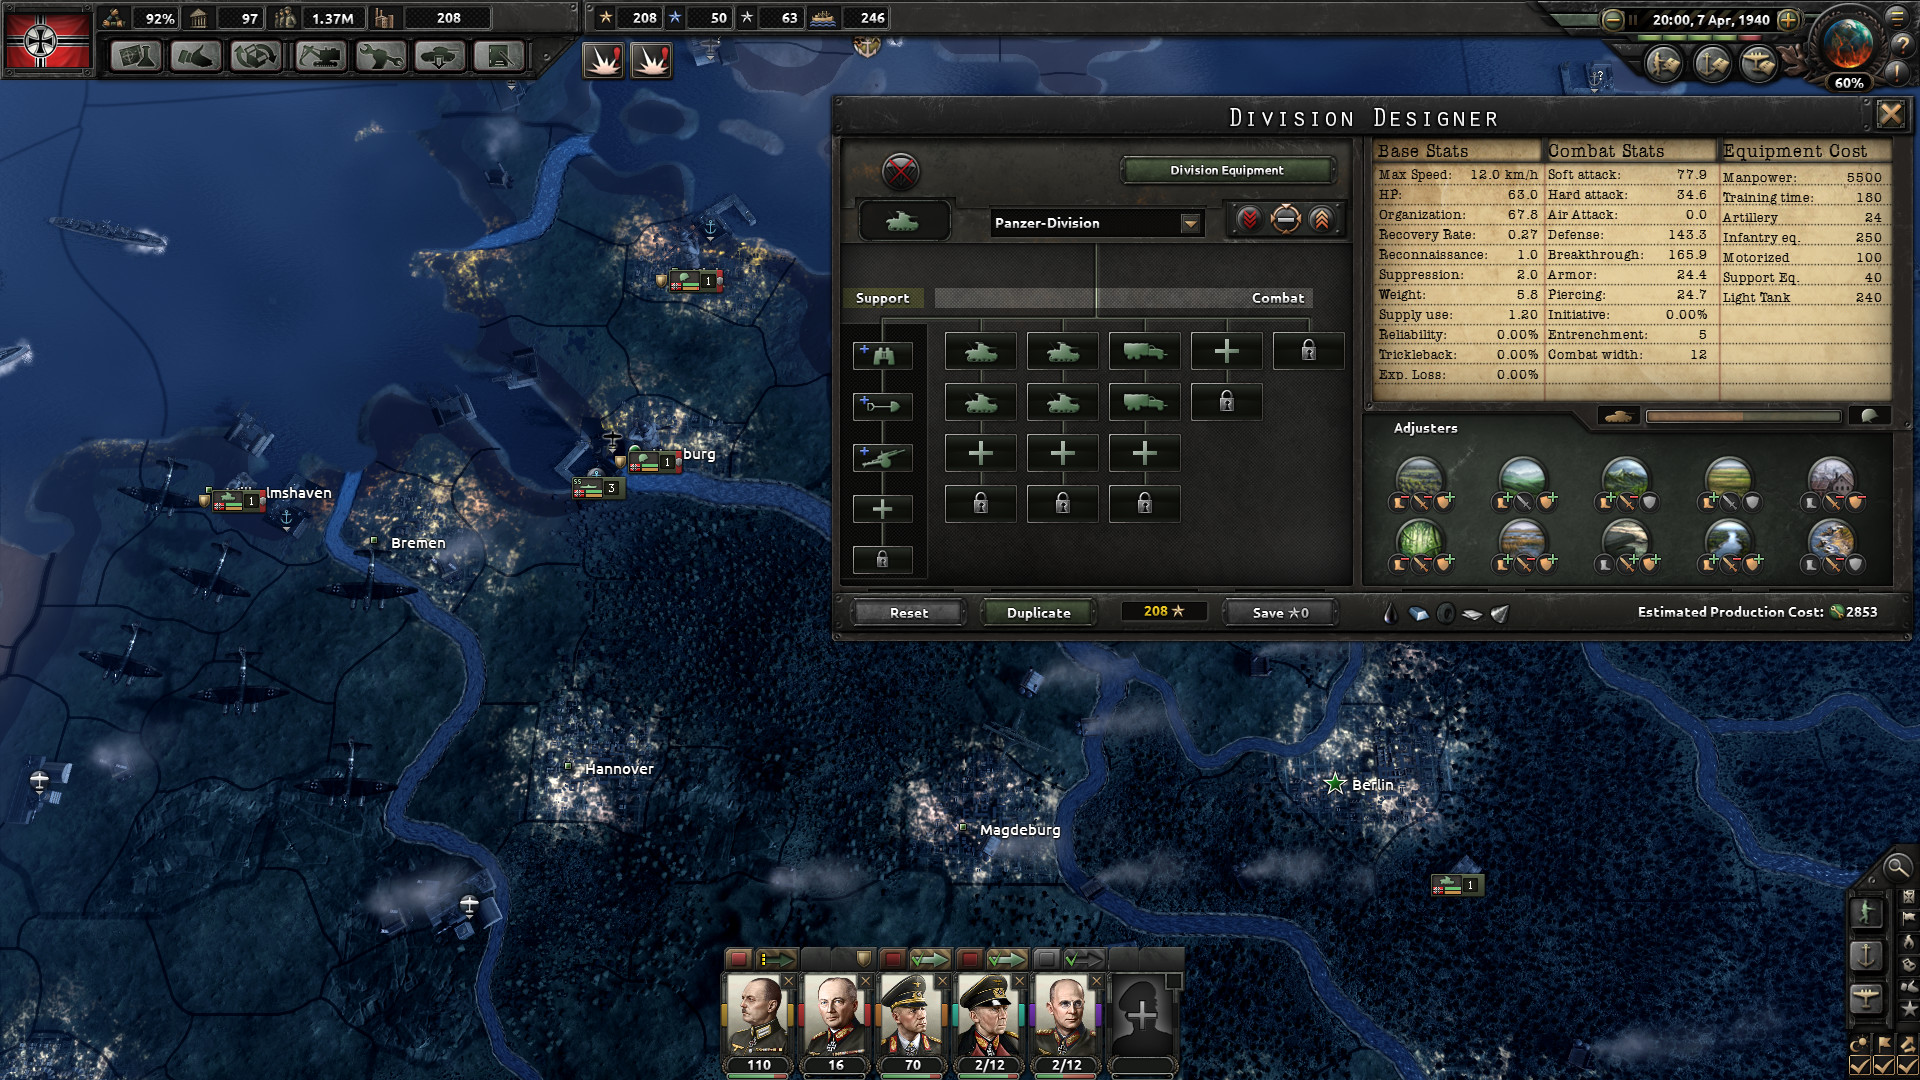 Hearts of iron 4 workshop